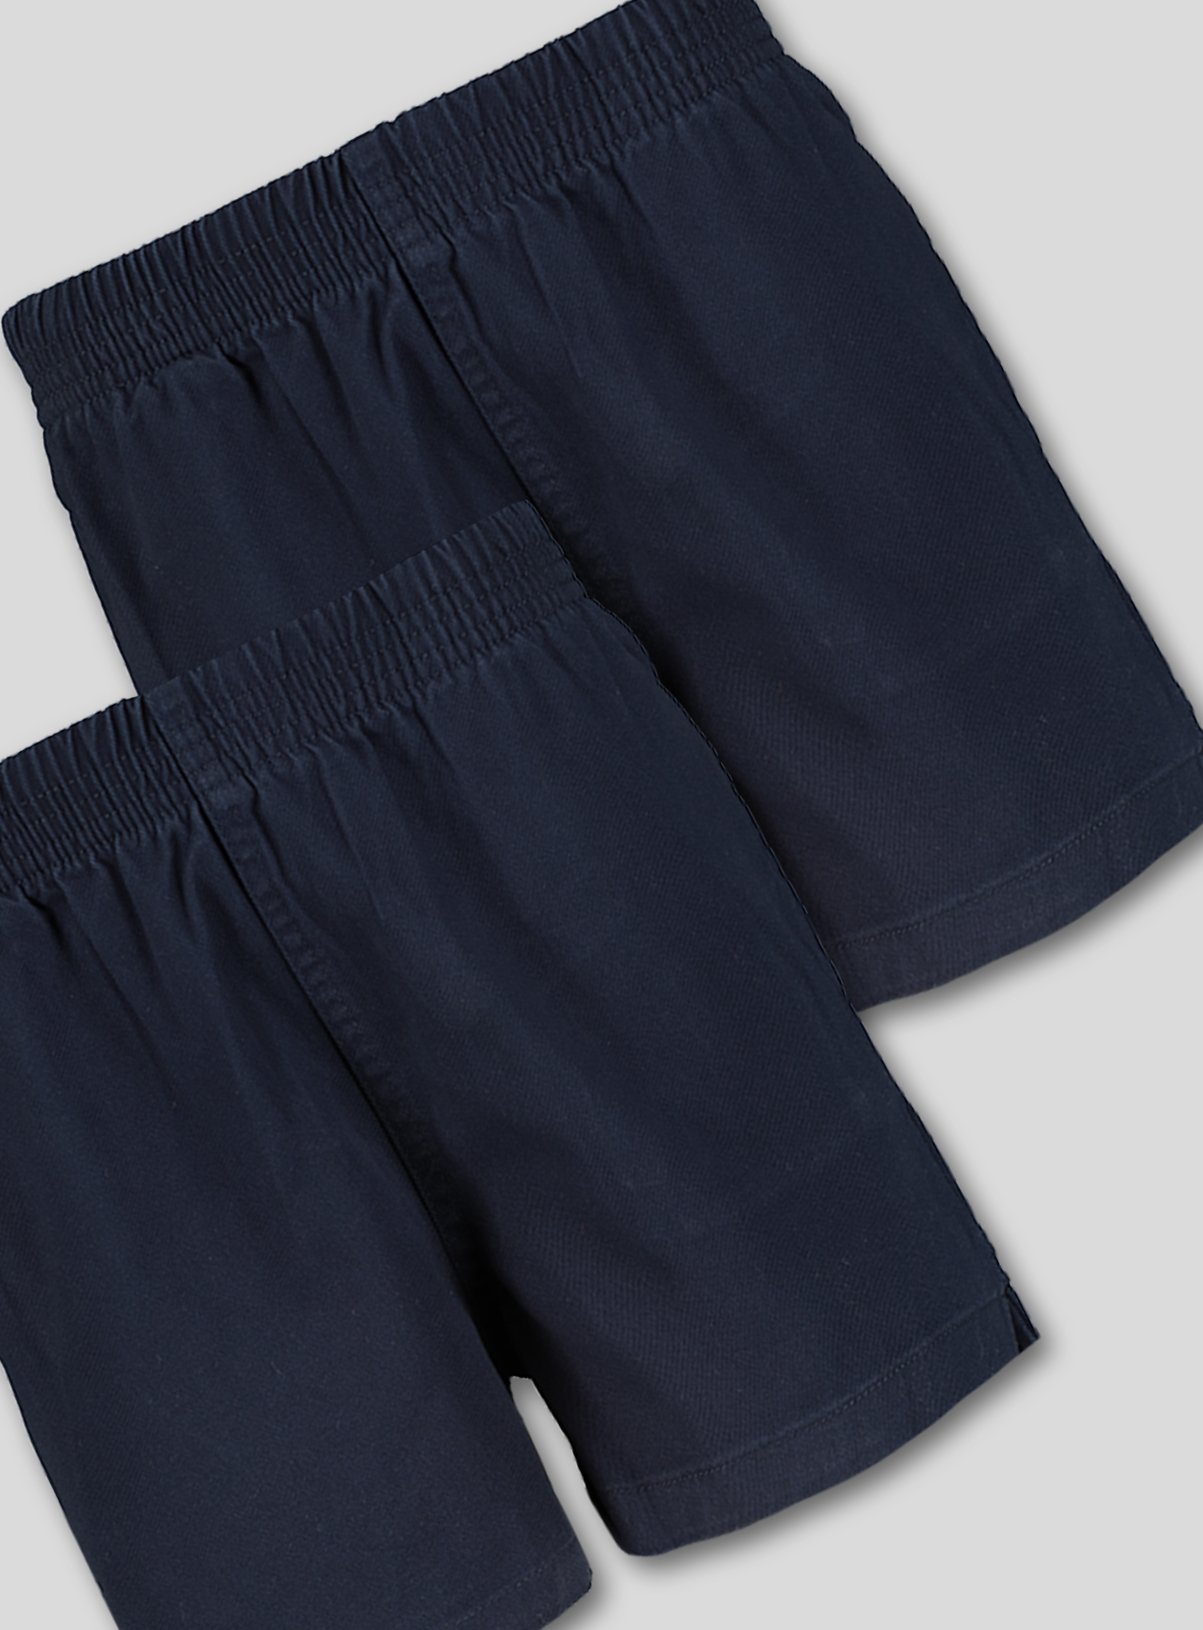 Navy Woven Rugby Shorts 2 Pack Review